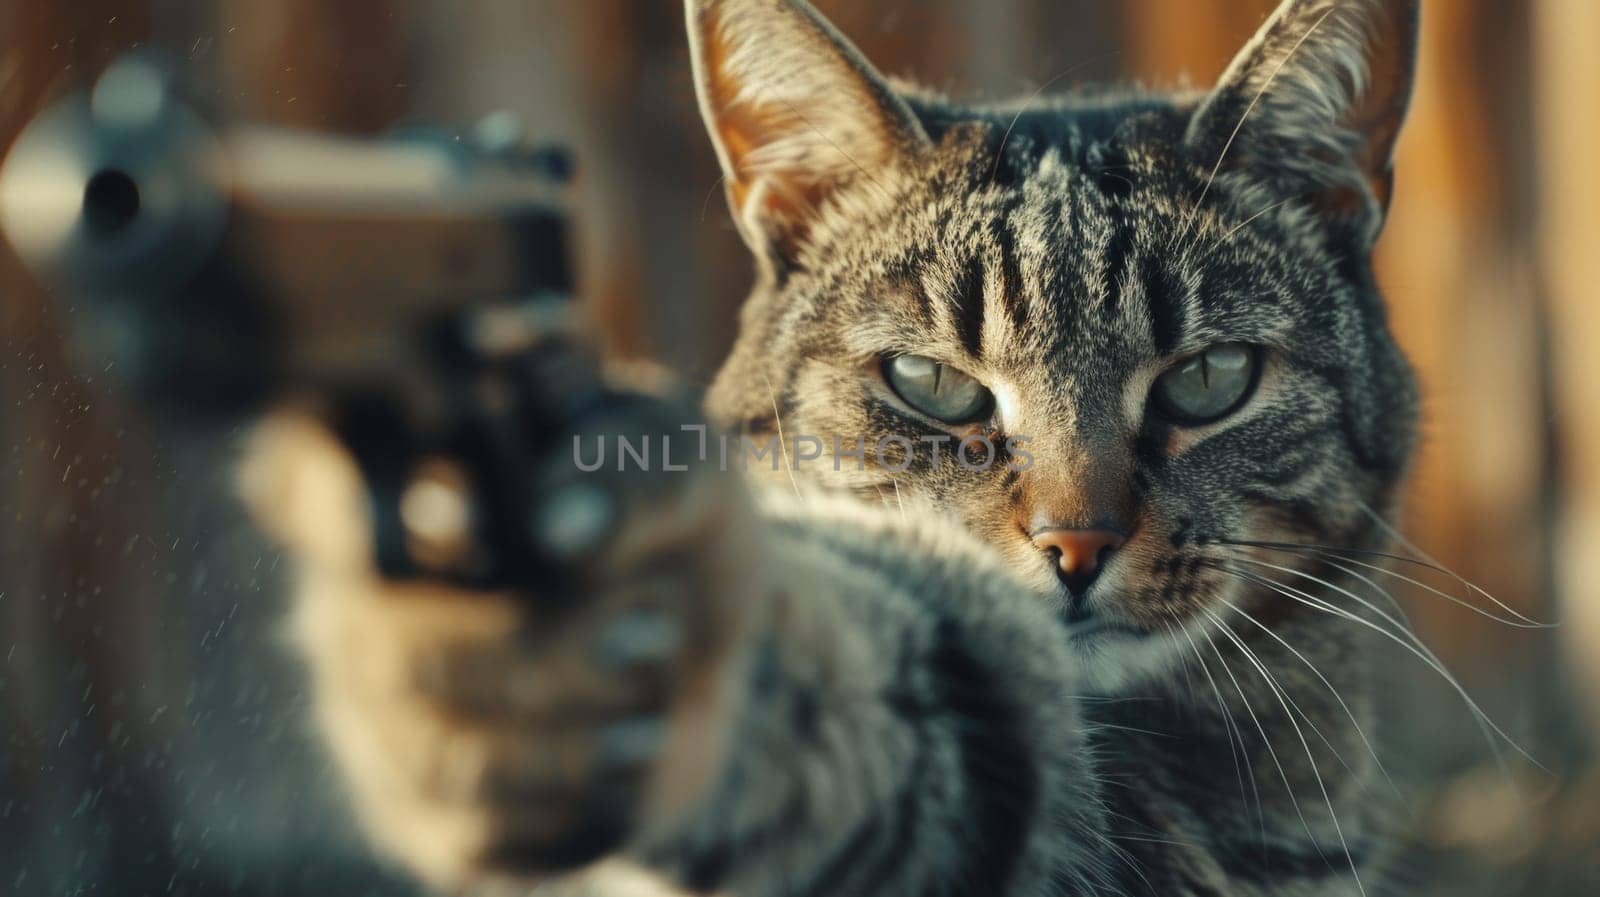 A cat with a gun pointing at something in the distance, AI by starush